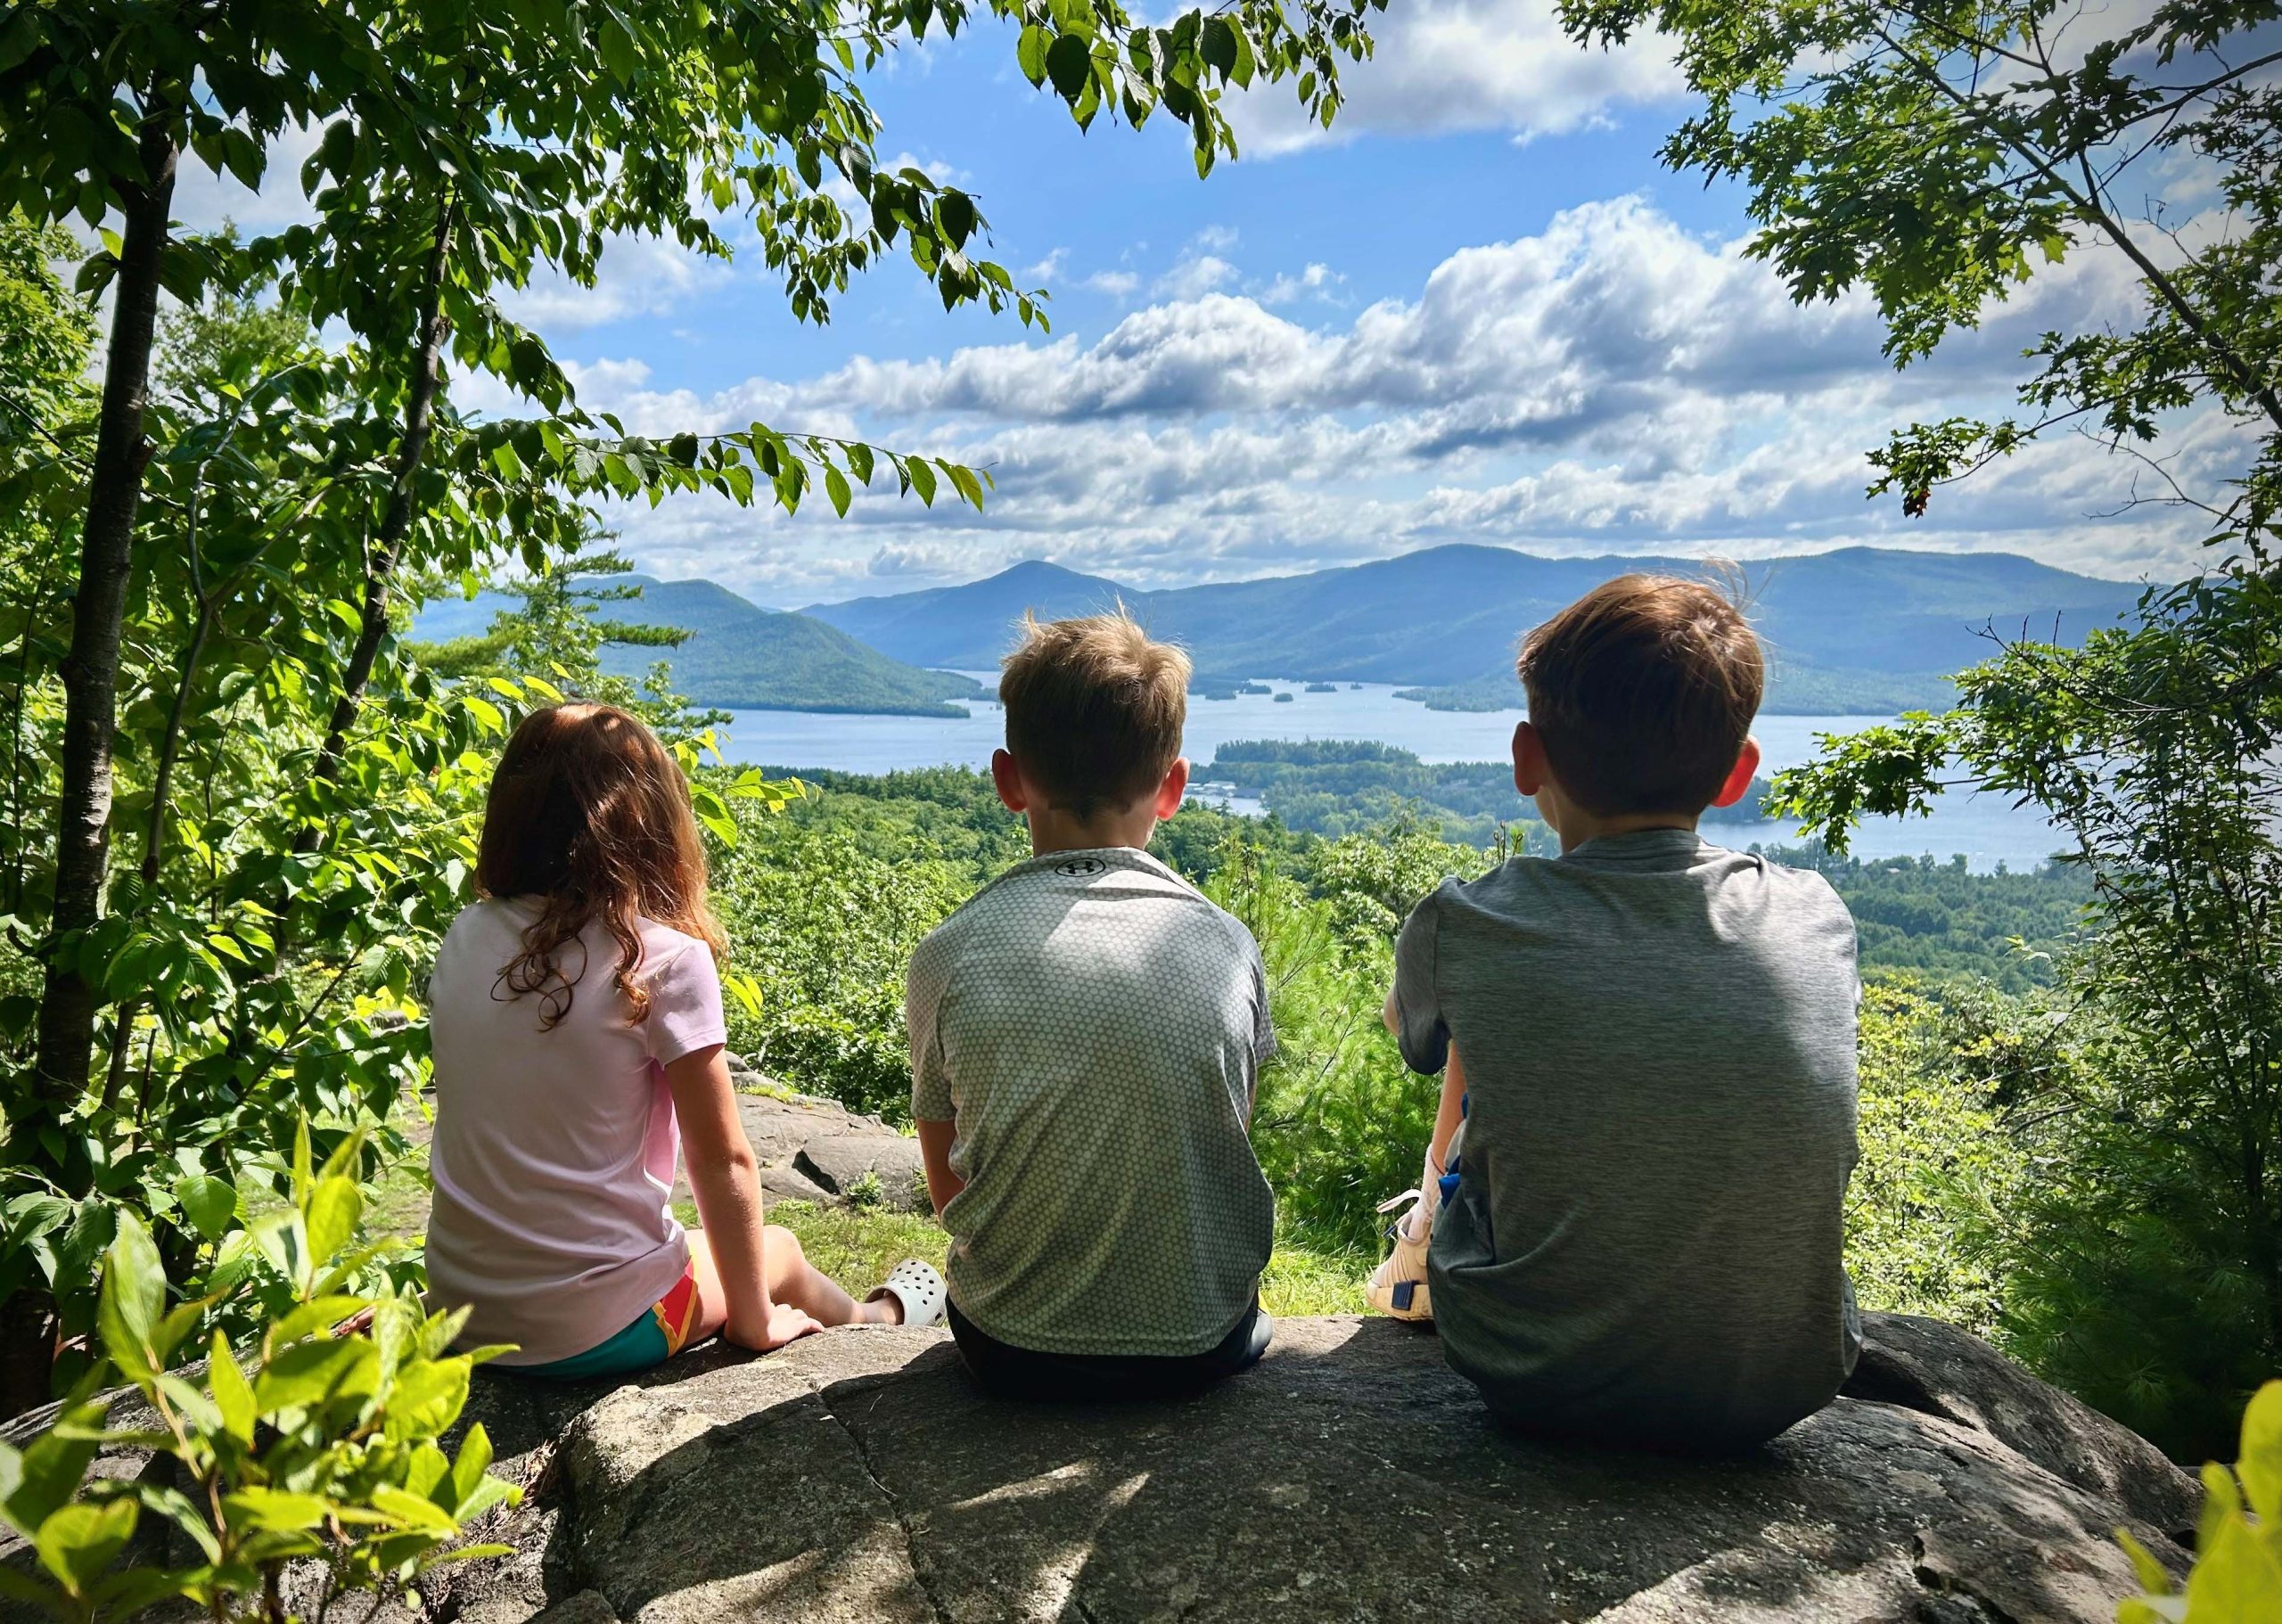 Three children sitting on a rock with their backs to the camera overlooking a lake